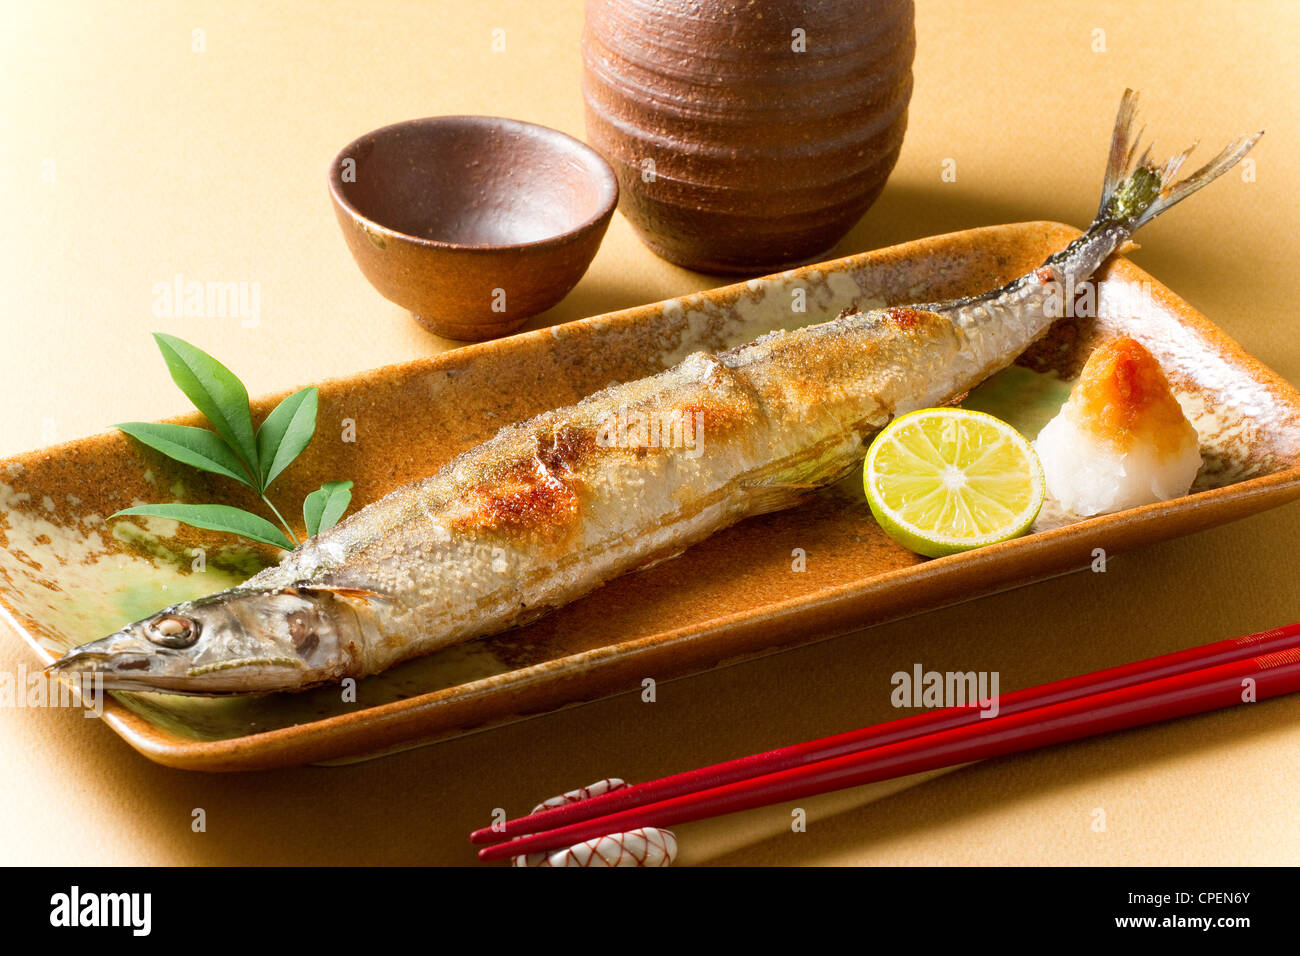 Fish On Tray With Chopstick And Ceramic Pots Stock Photo